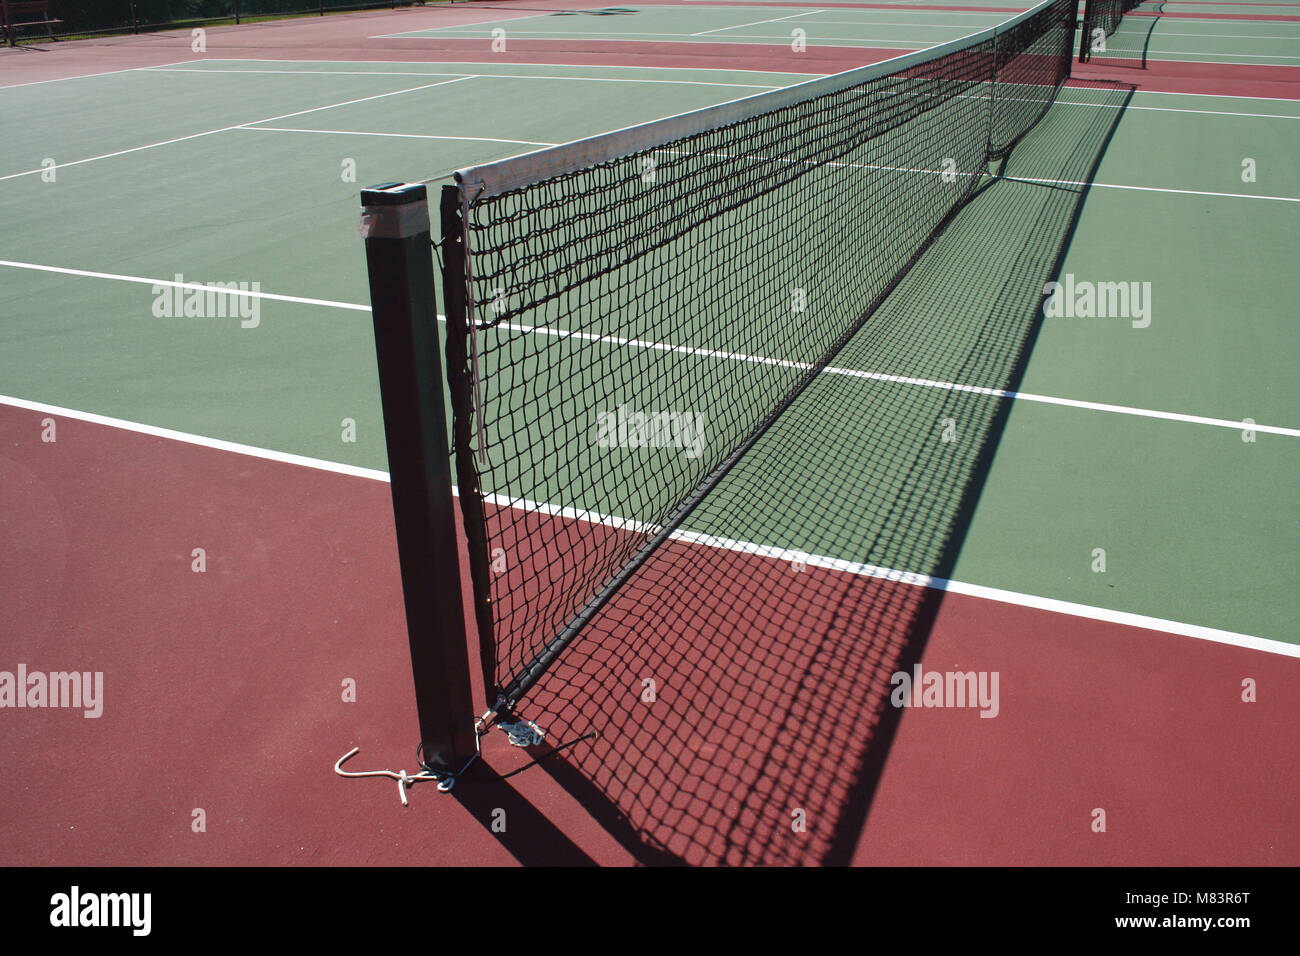 A empty green Tennis Court with net Stock Photo